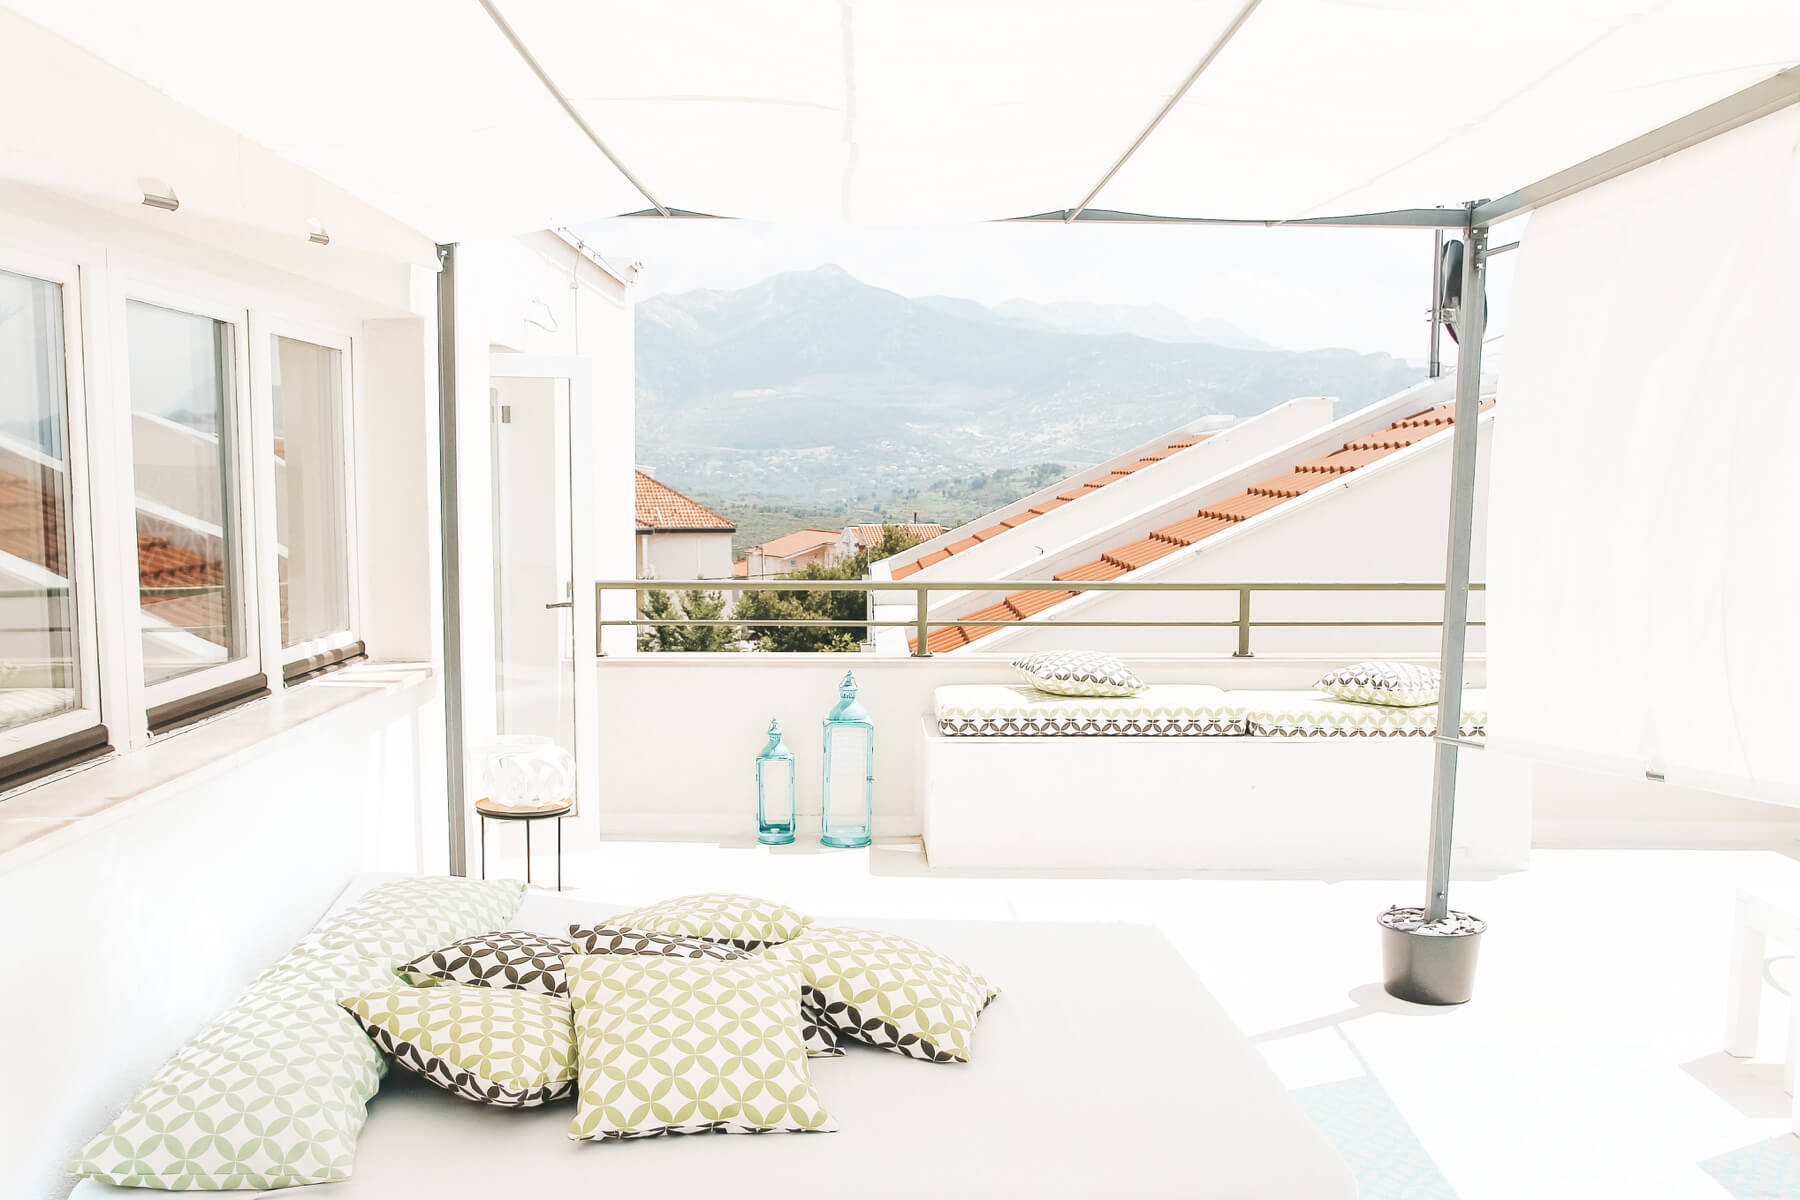 Beautiful outdoor rooftop vibes the Bohoho Croatia, villas in croatia, villa split, villas in split croatia, accommodation split croatia